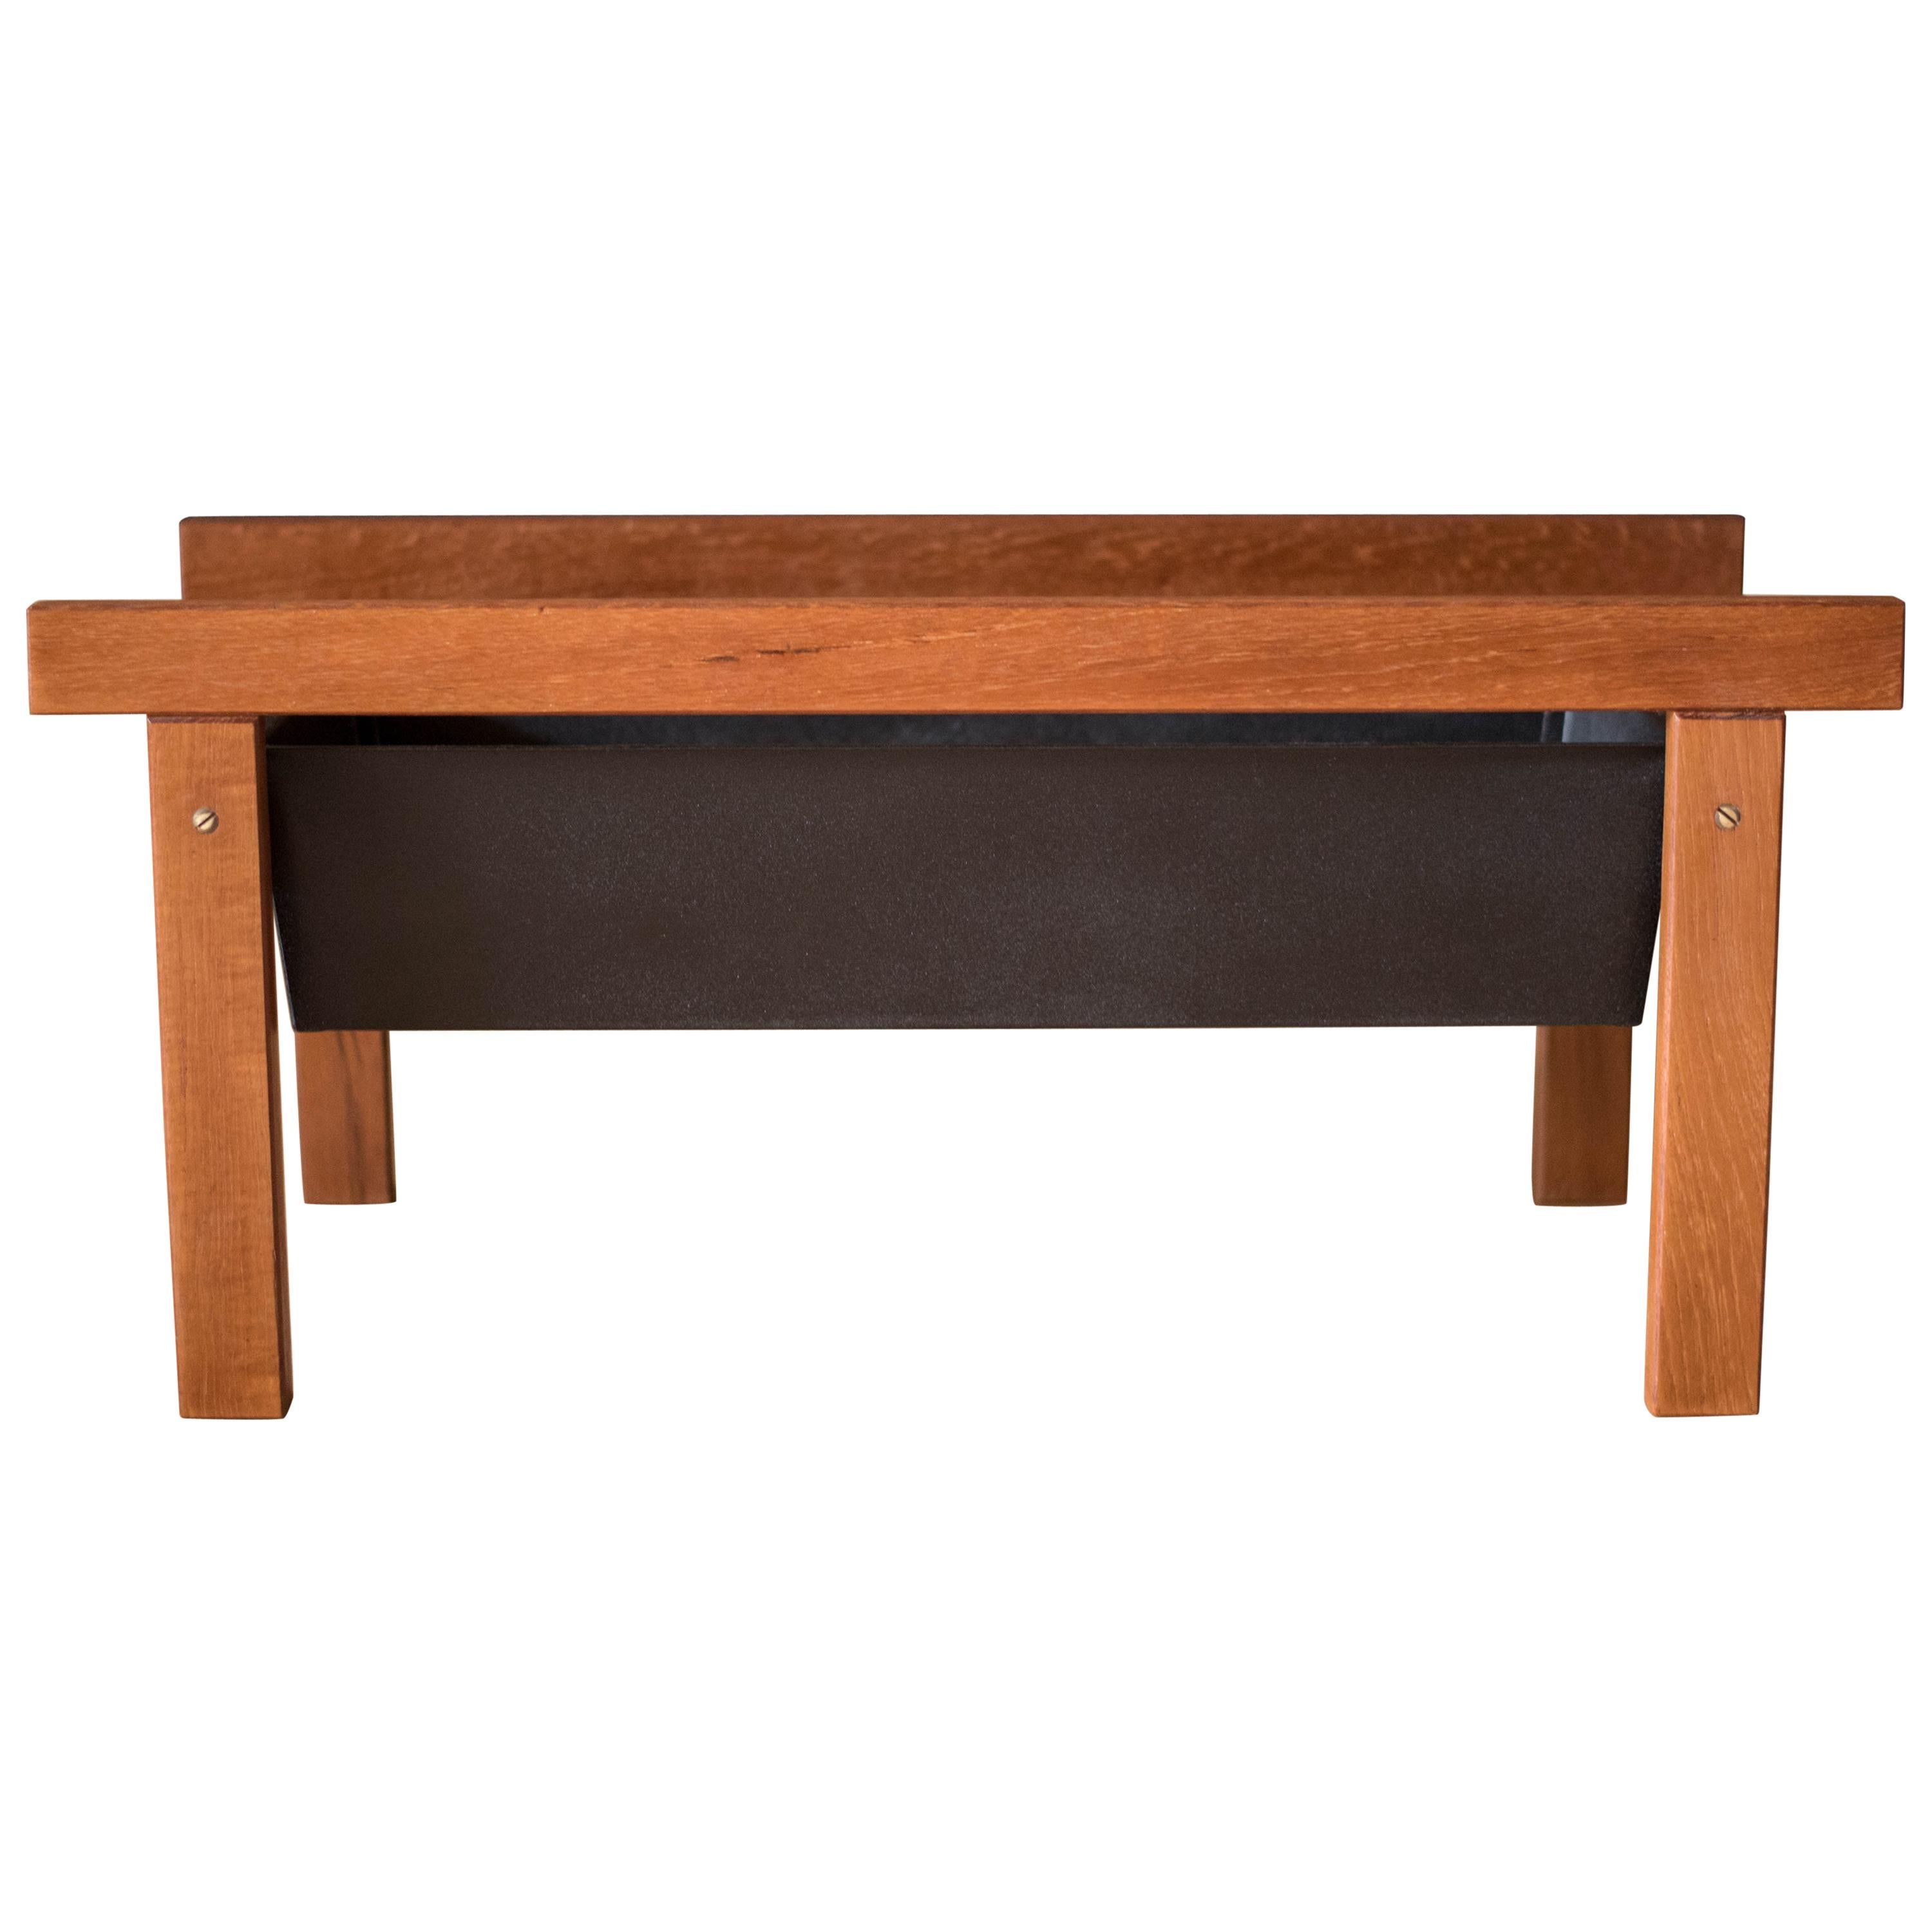 Mid-Century Modern indoor planter, circa 1960s. This piece features a minimalist teak frame that includes a removable black metal tray. The perfect accessory to liven up any home or office space. 


Interior tray 22.5